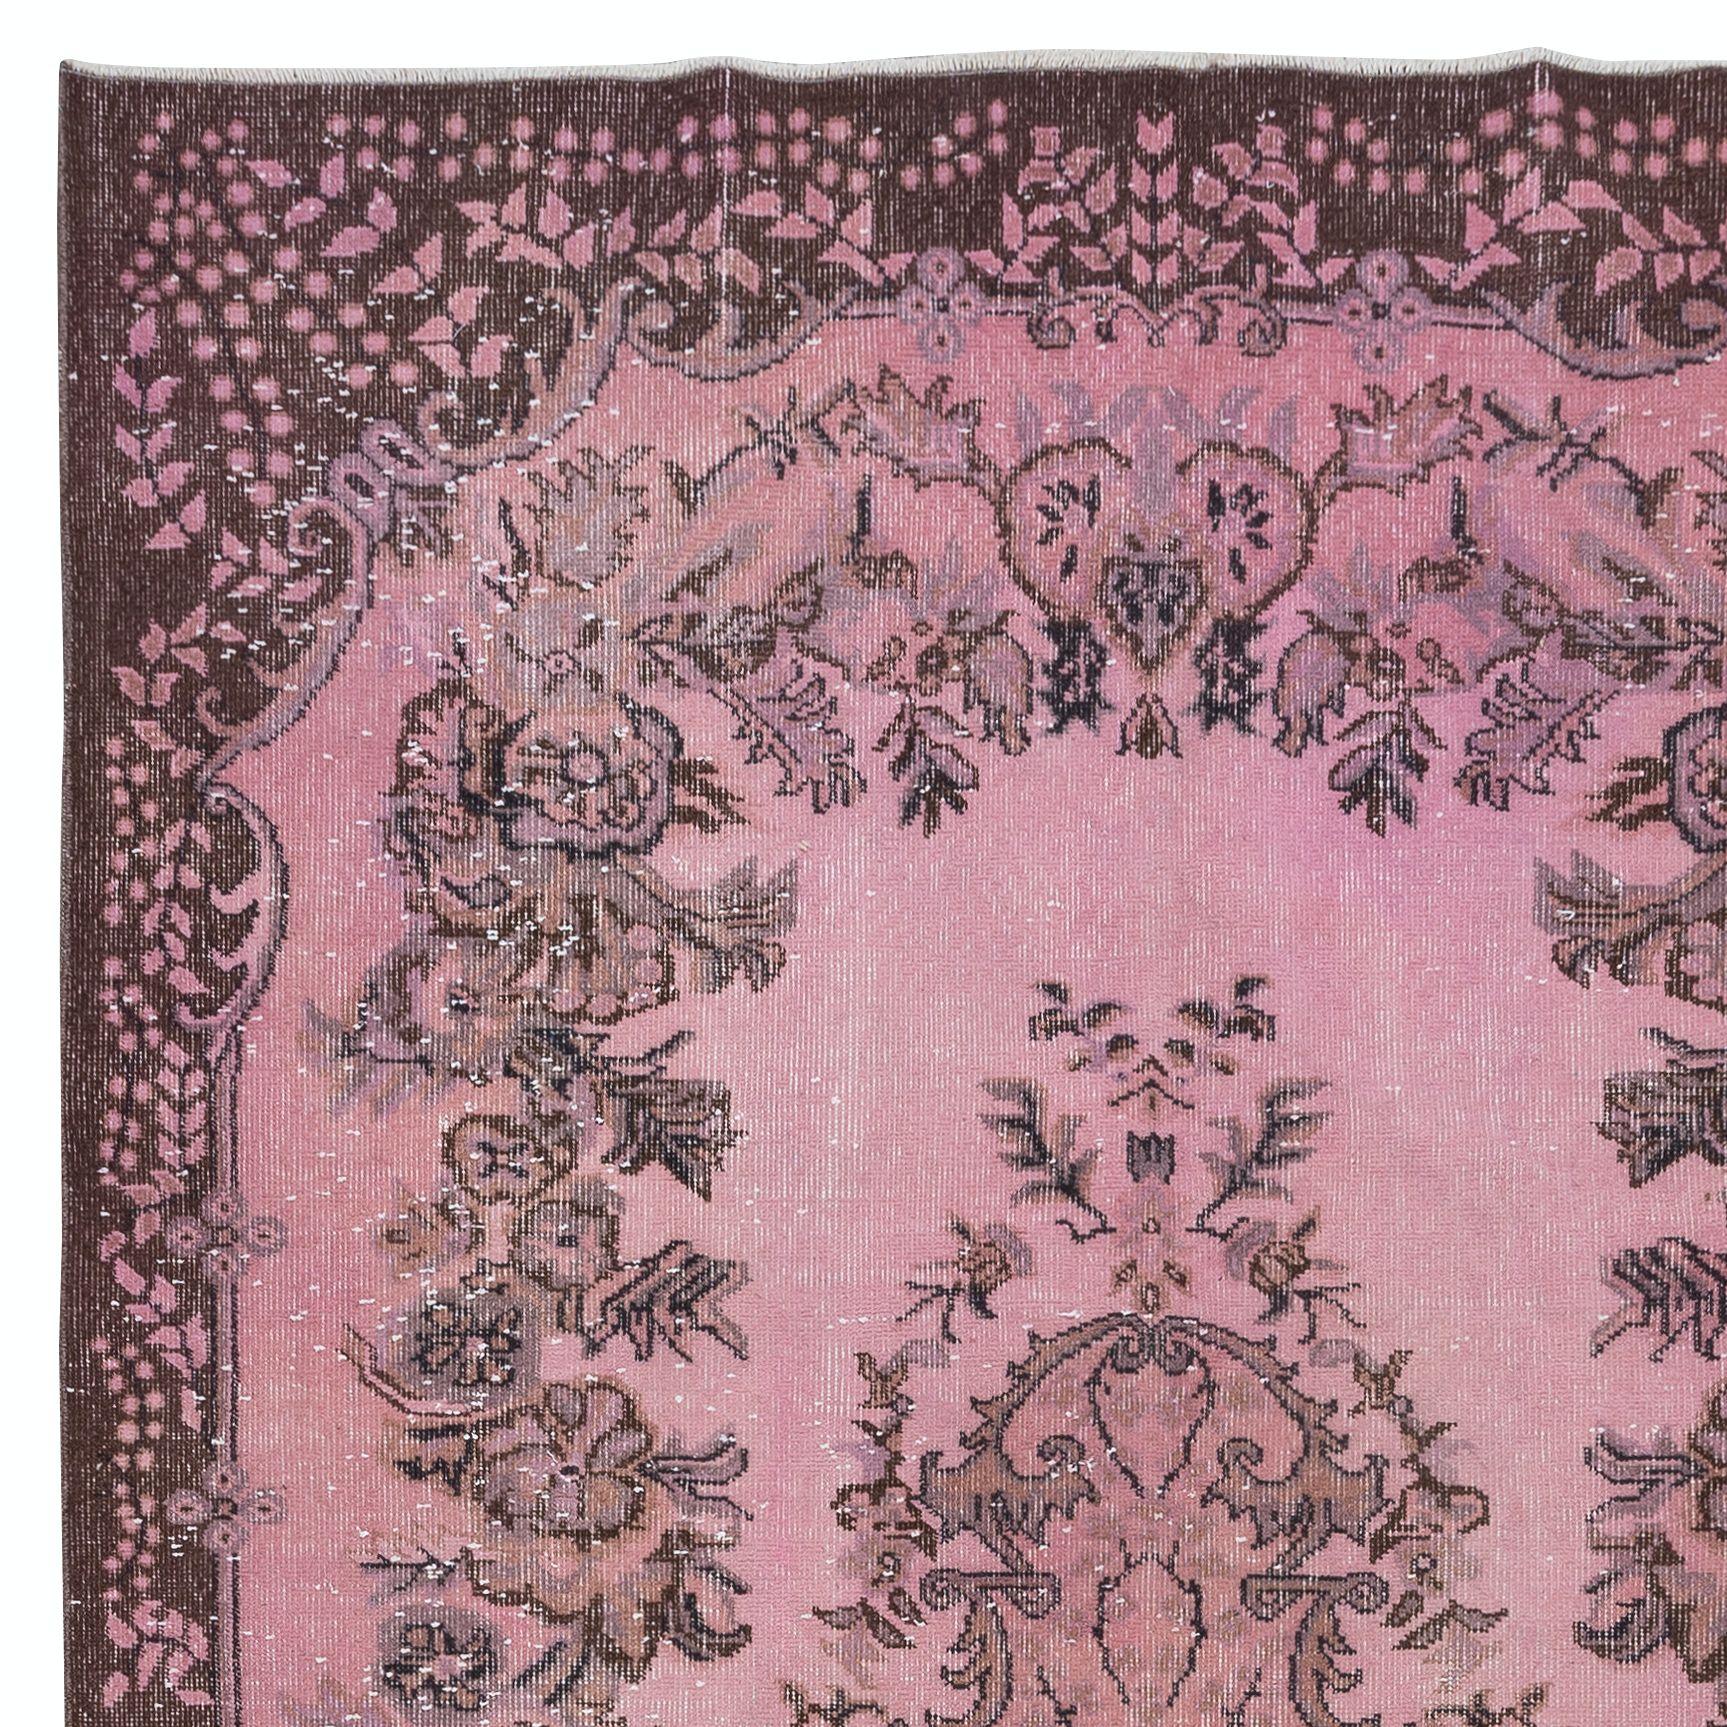 Hand-Woven 6x9.8 Ft Pink Area Rug for Modern Interiors, Handmade Turkish Carpet For Sale